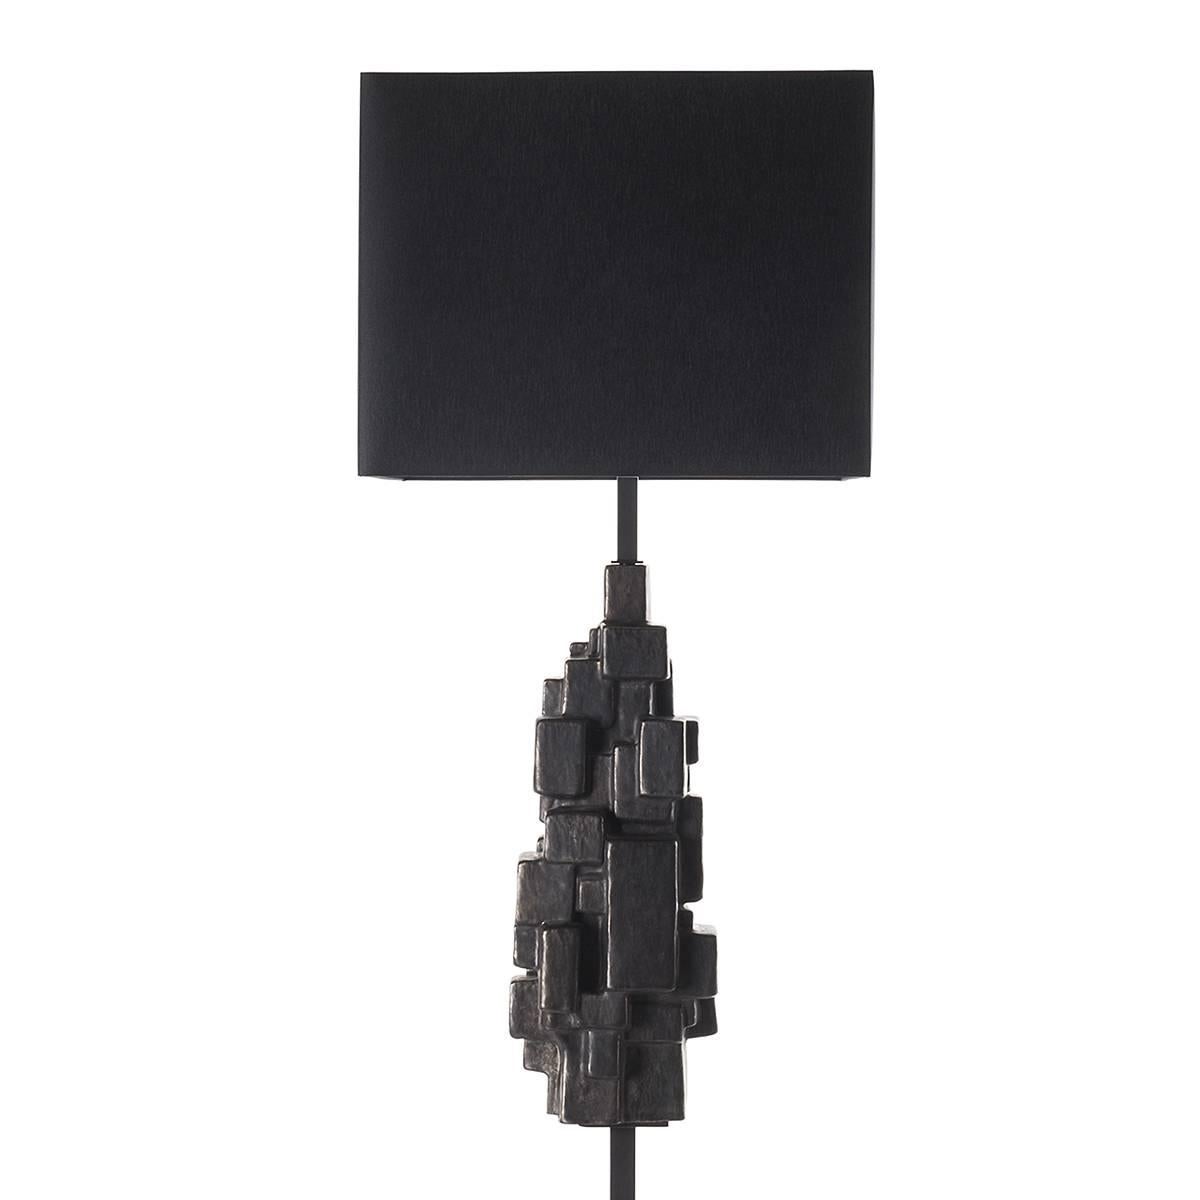 Sculptural ceramic floor lamp with shade.
Superb way to glam up the space. This ceramic is skillfully glazed in a lead finish for a Brutalist mood. The floor lamp is complemented by a square black fabric shade. Wired to your request, 1 x E27/E26